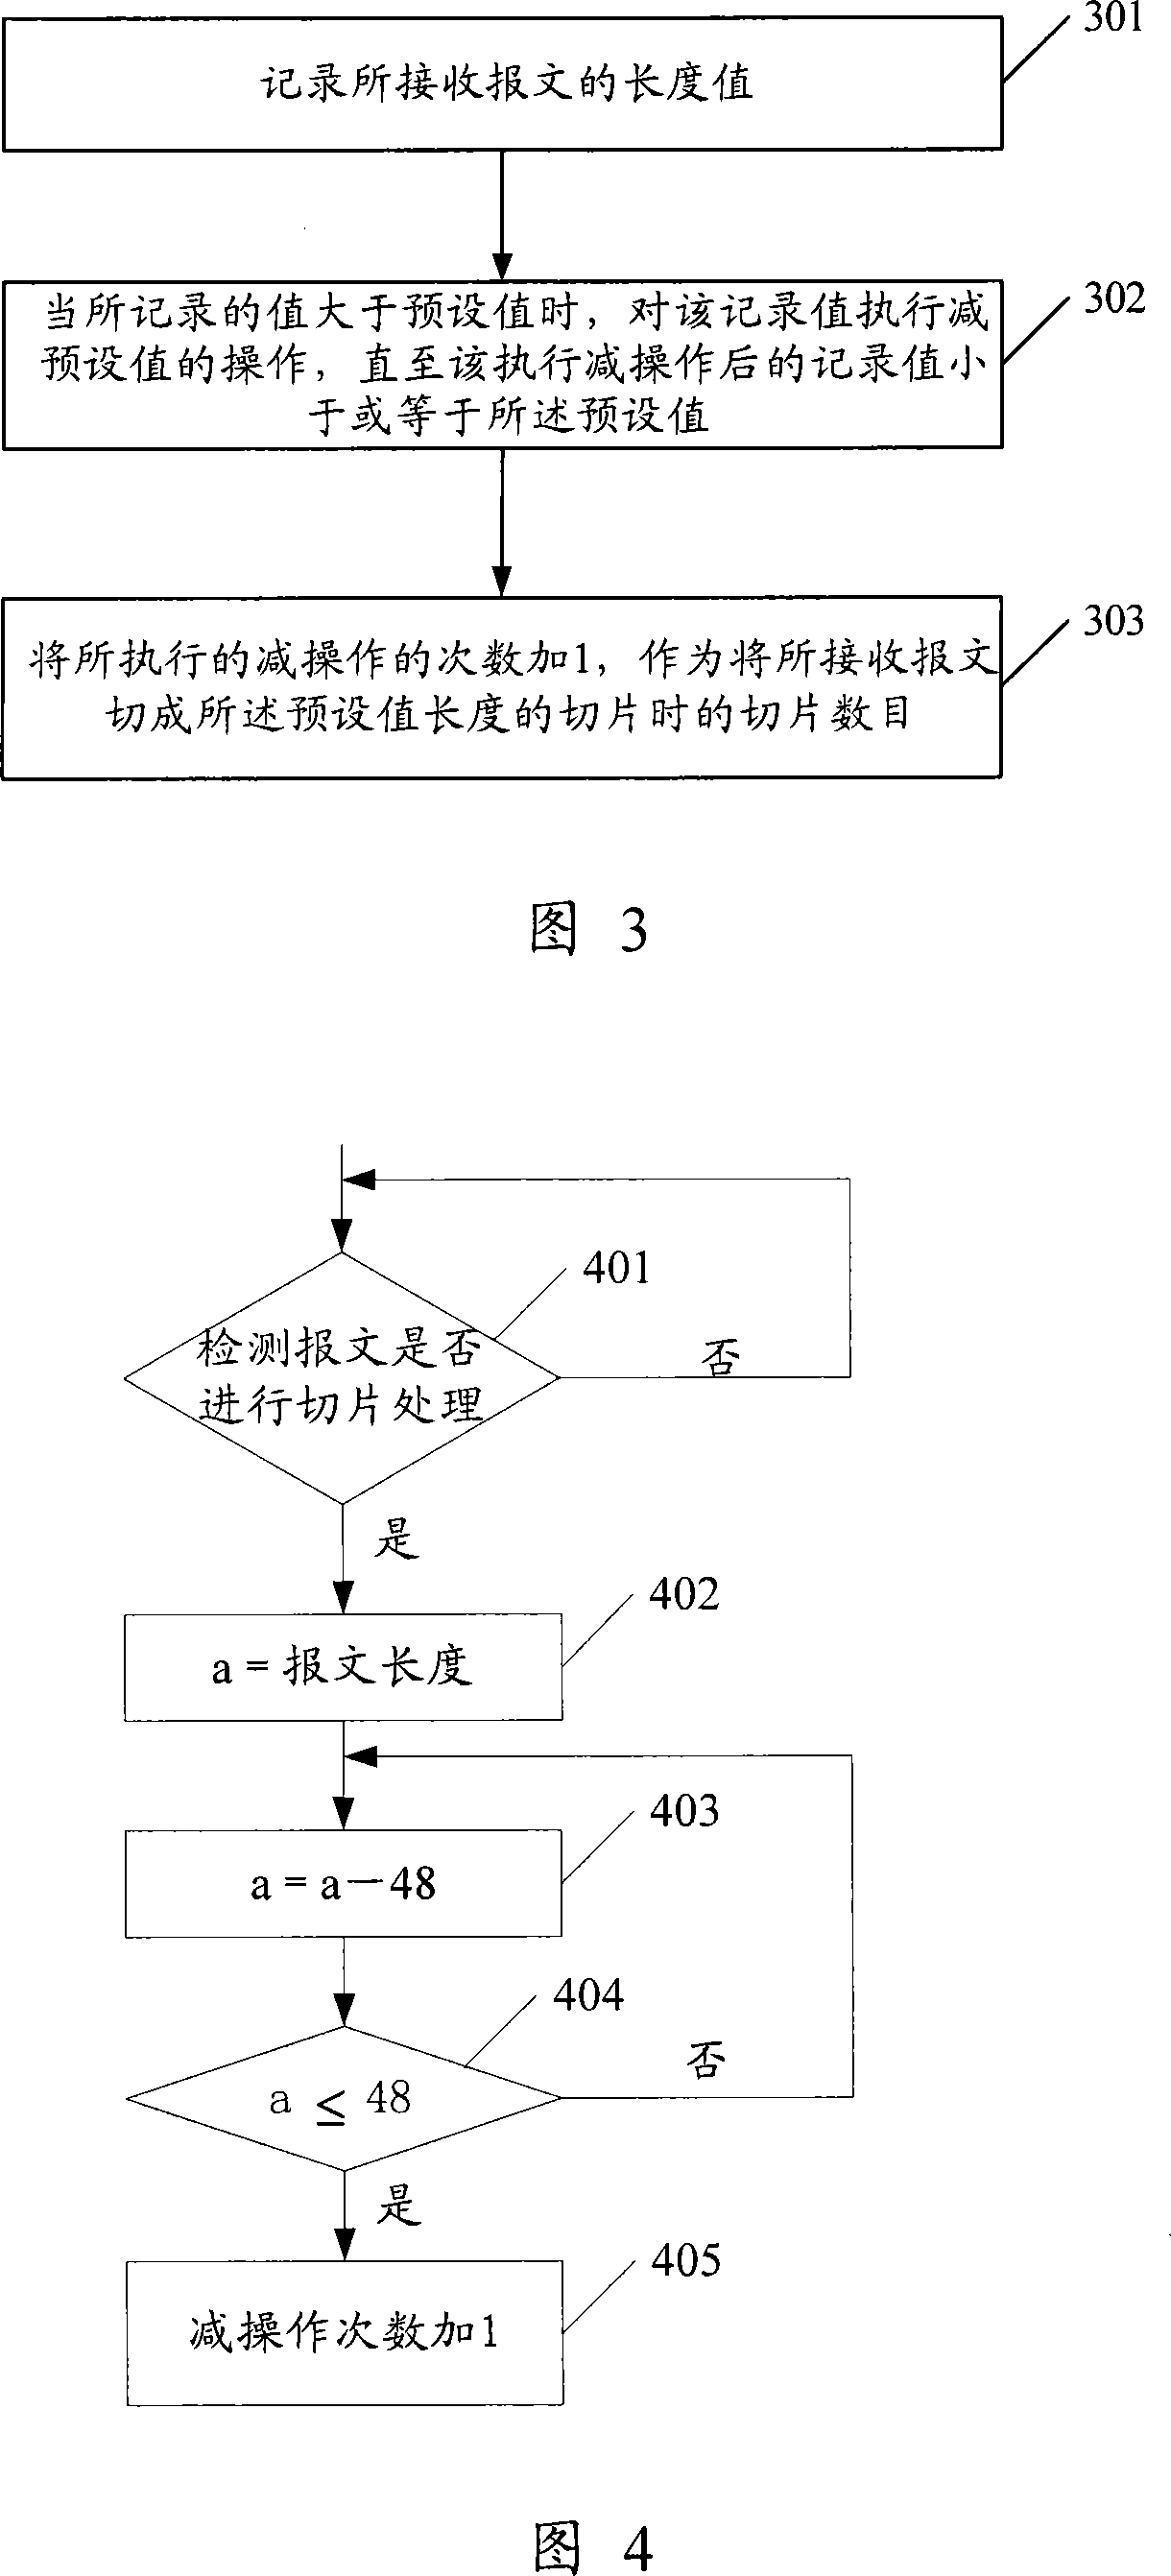 Method and apparatus for obtaining packet slice numbers